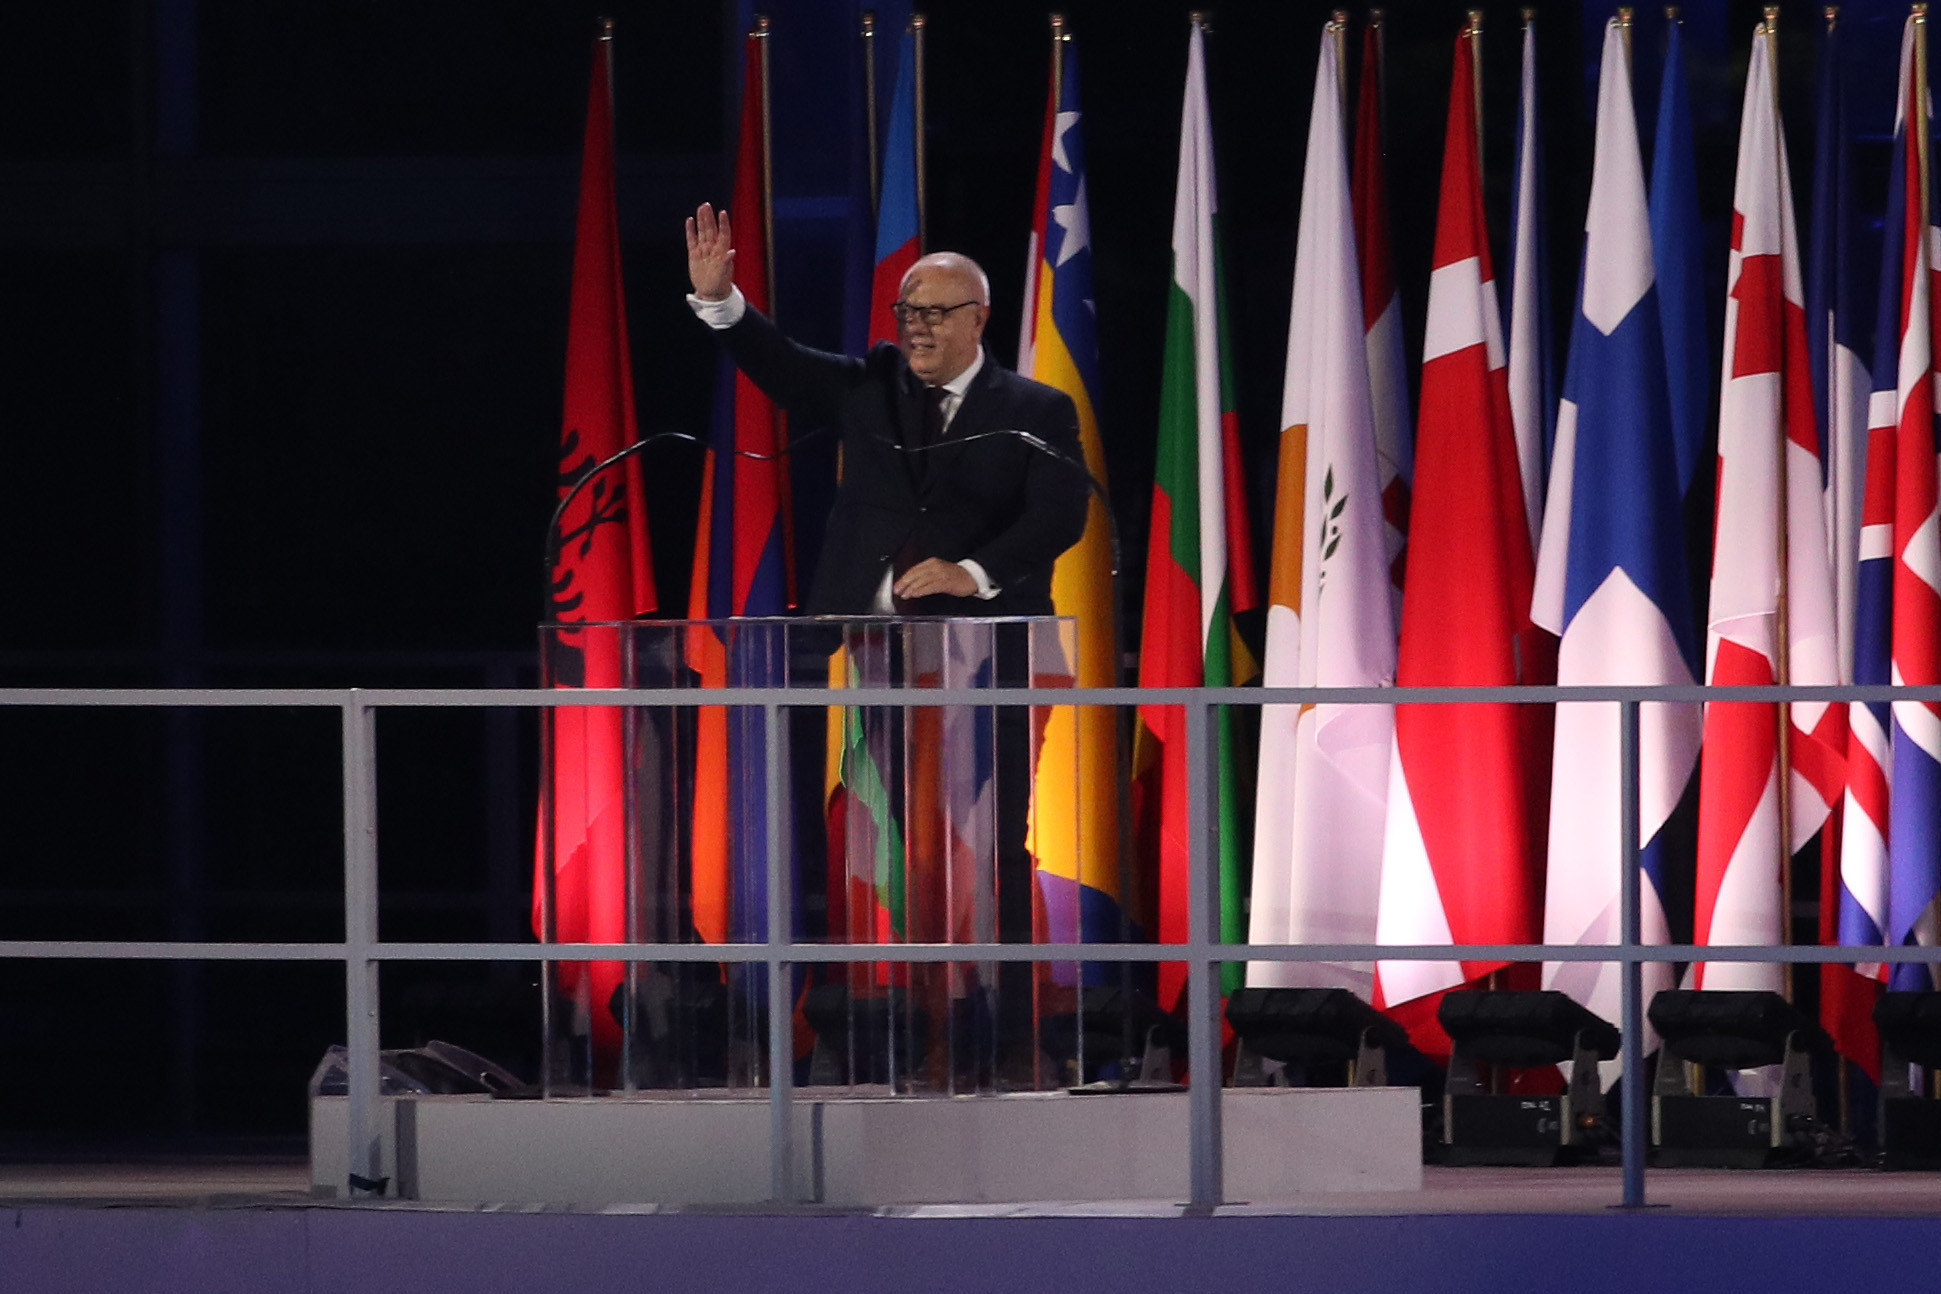 The European Games began with Polish Minister of State Assets Jacek Sasin resoundingly jeered at the Opening Ceremony ©Kraków-Małopolska 2023